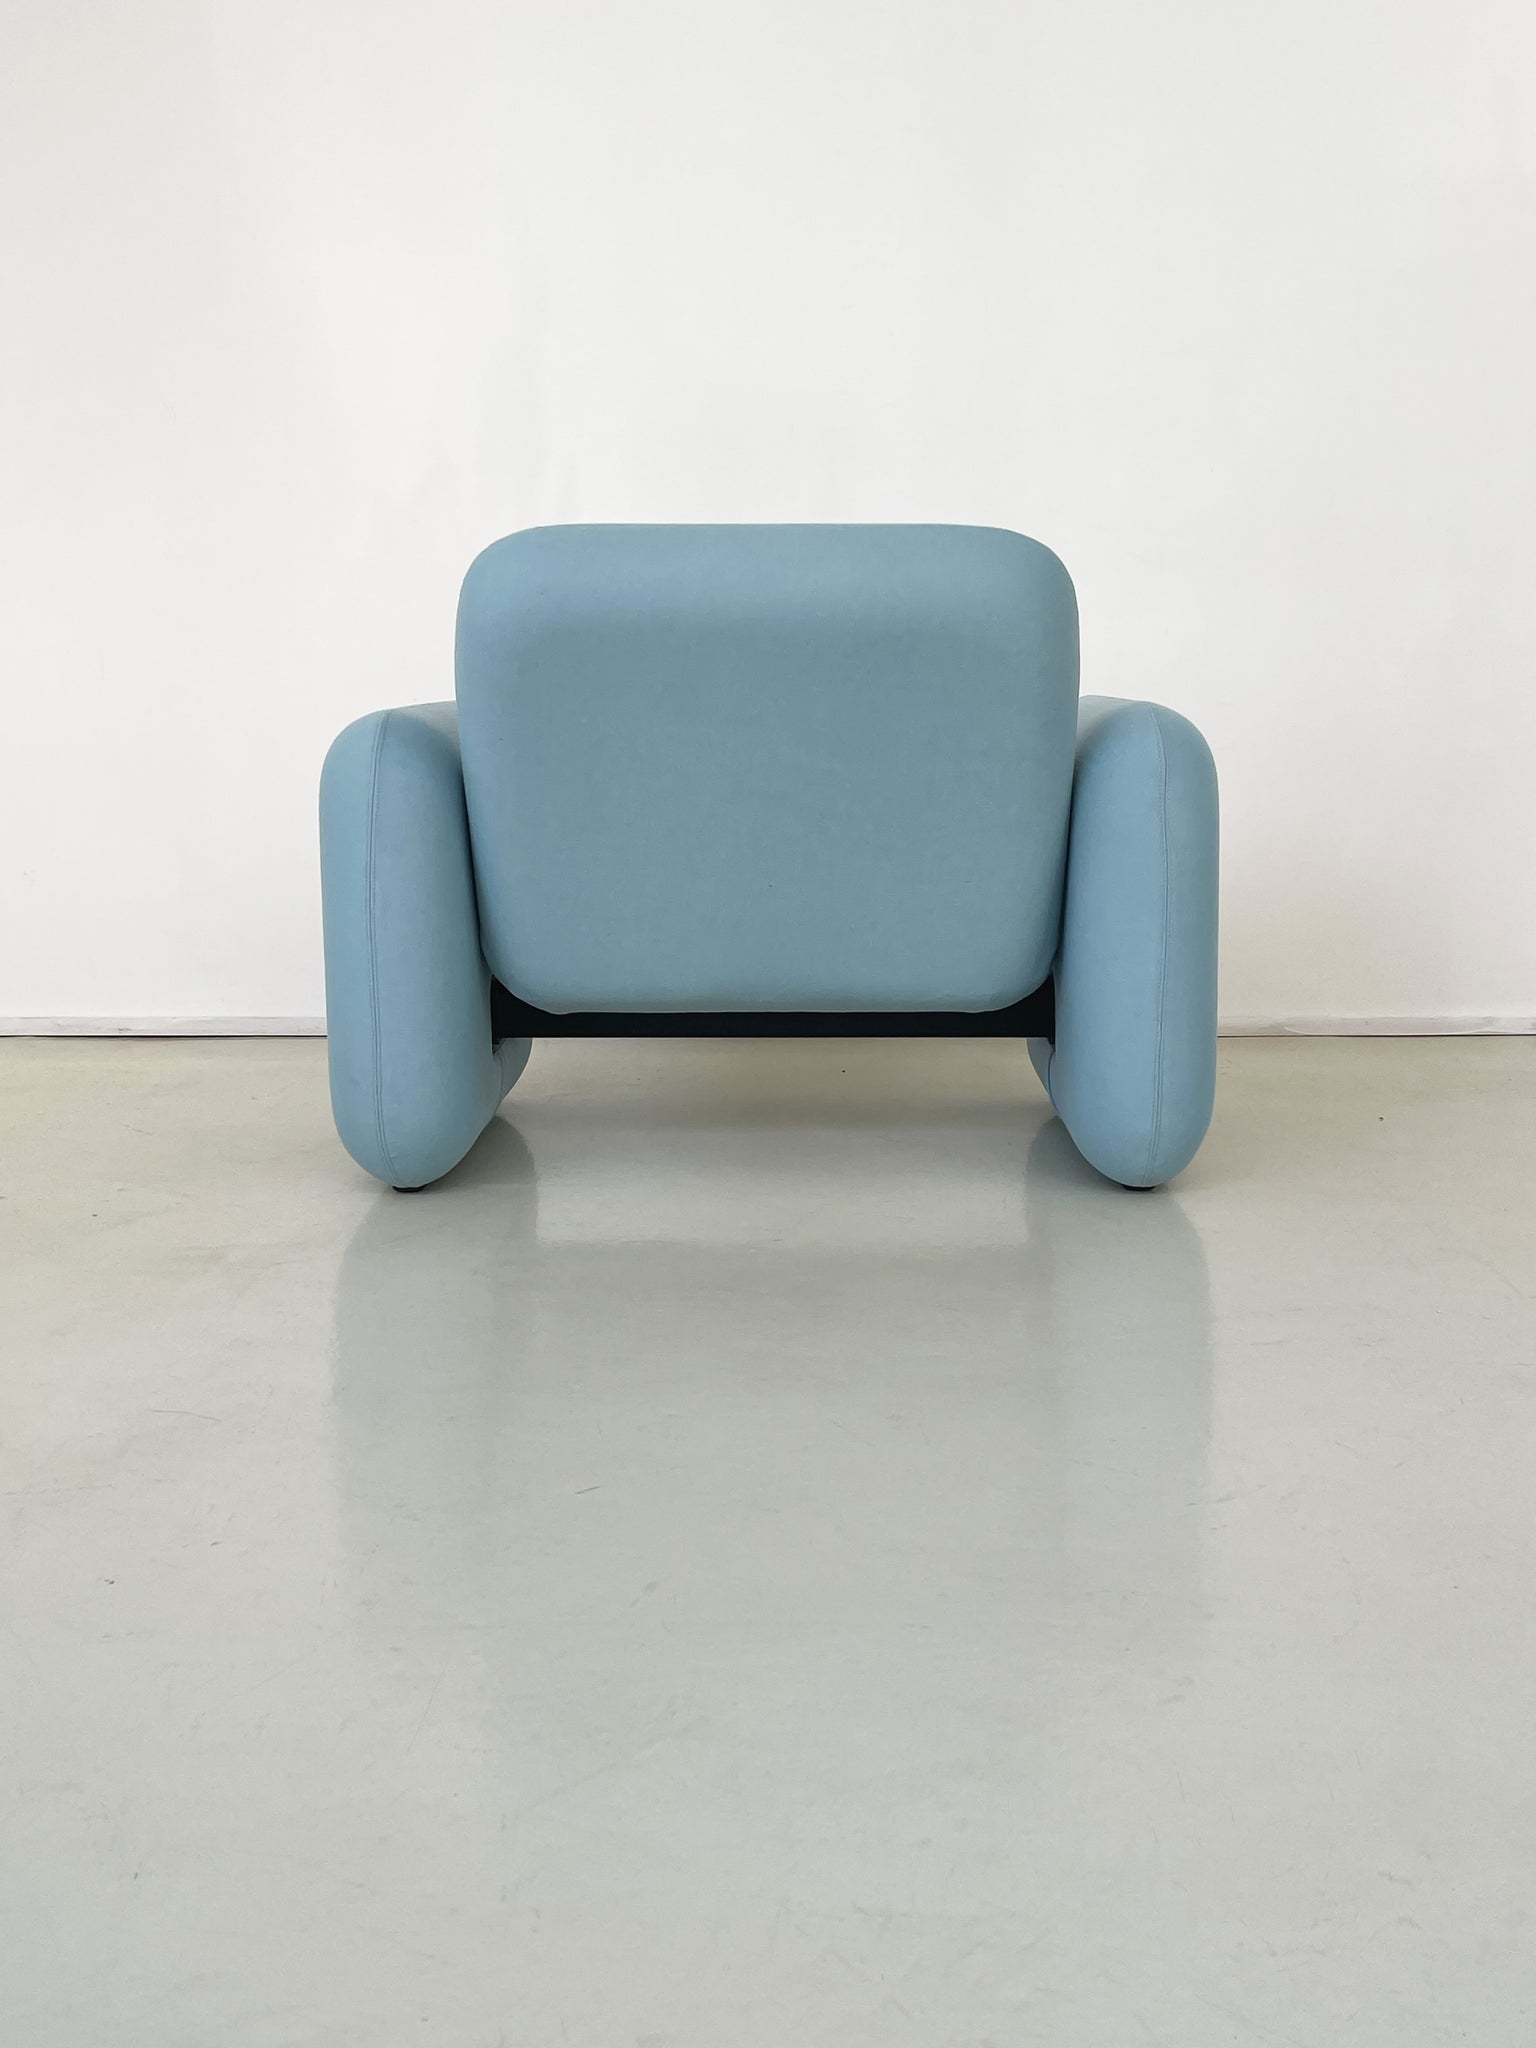 Baby Blue Ray Wilkes for Herman Miller Chiclet